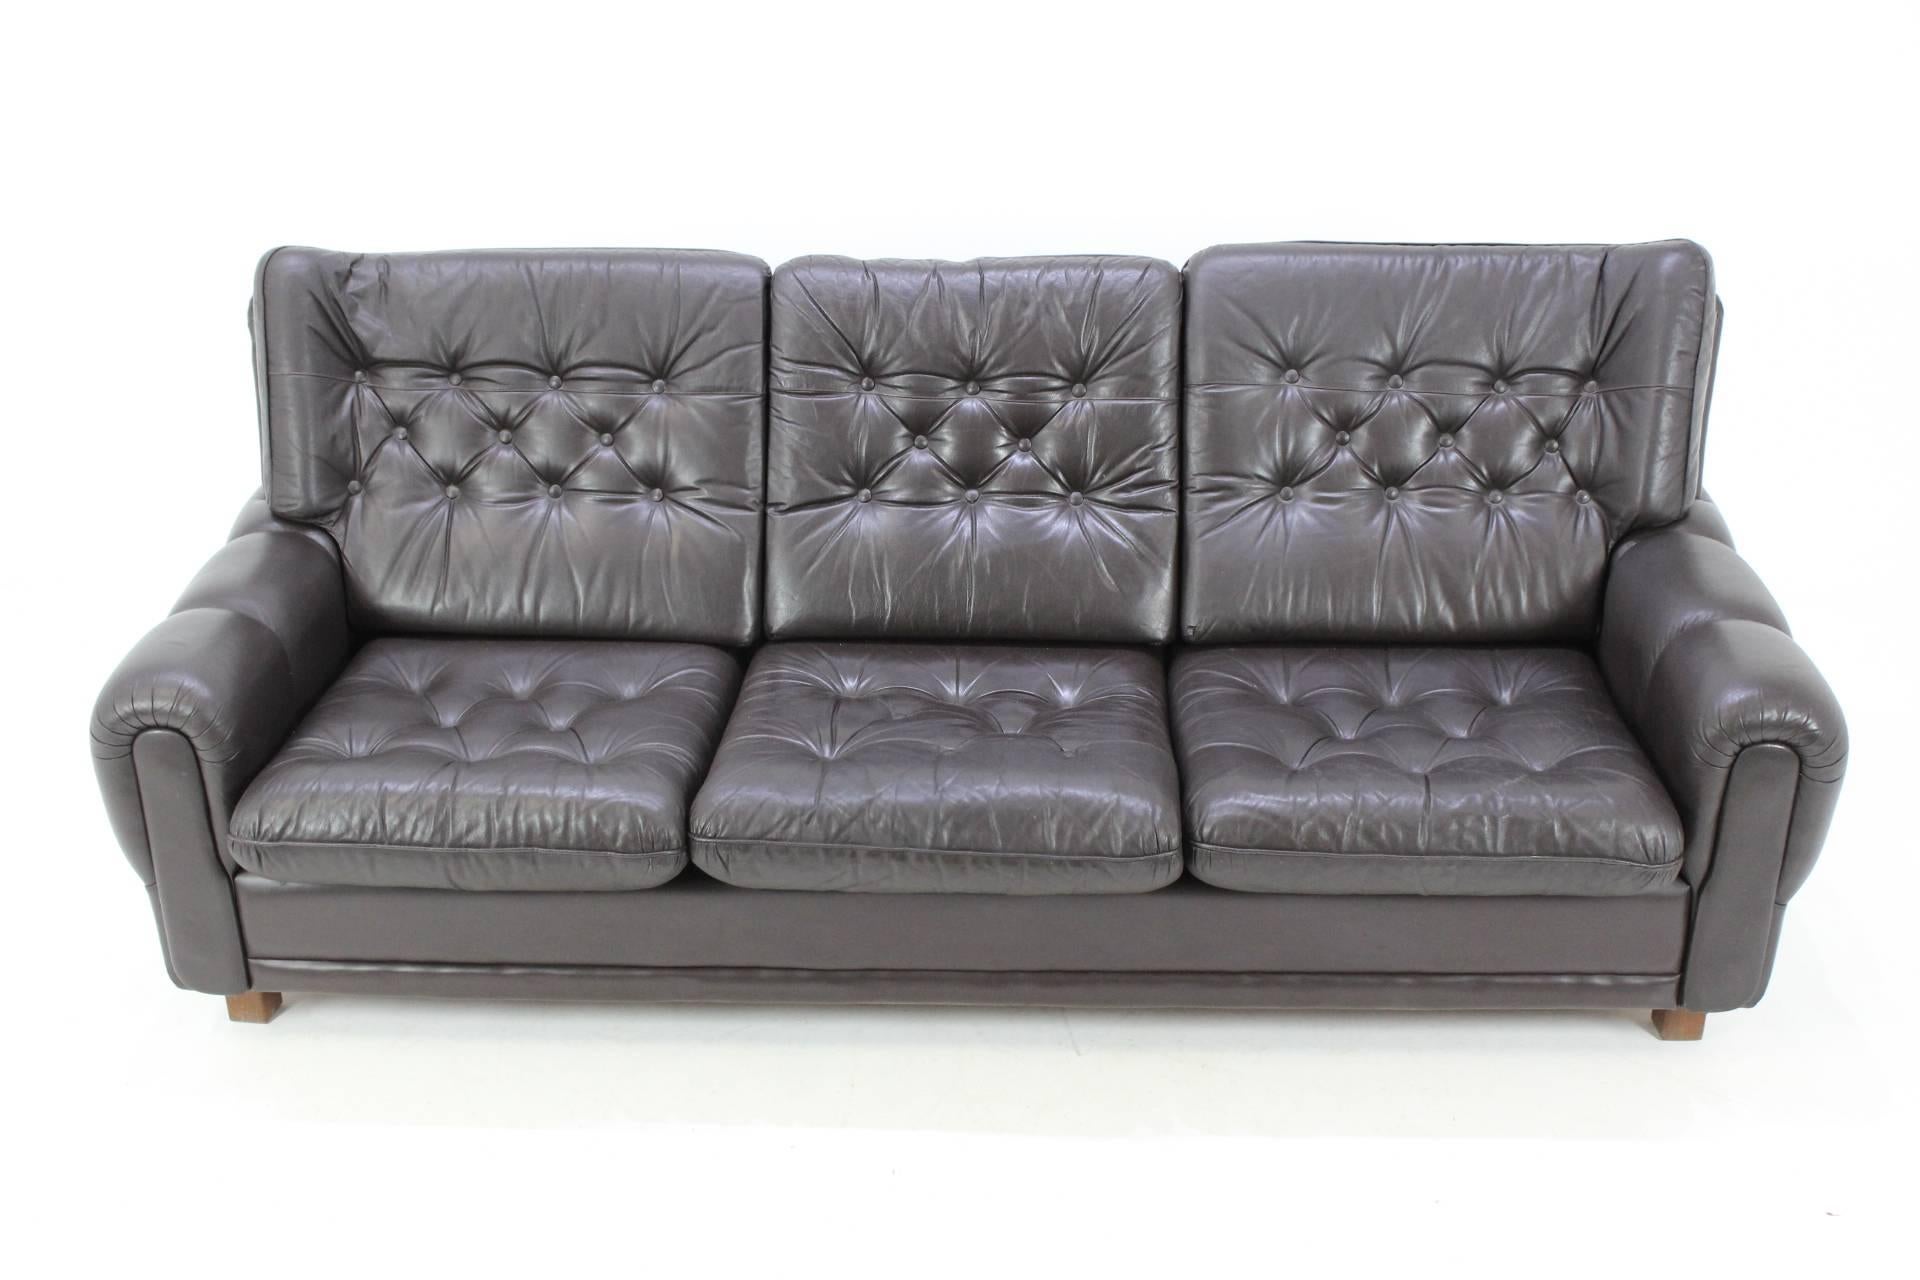 This sofa was produced in Czech Republic during the 1970s. It features a wood structure and brown leather seats.